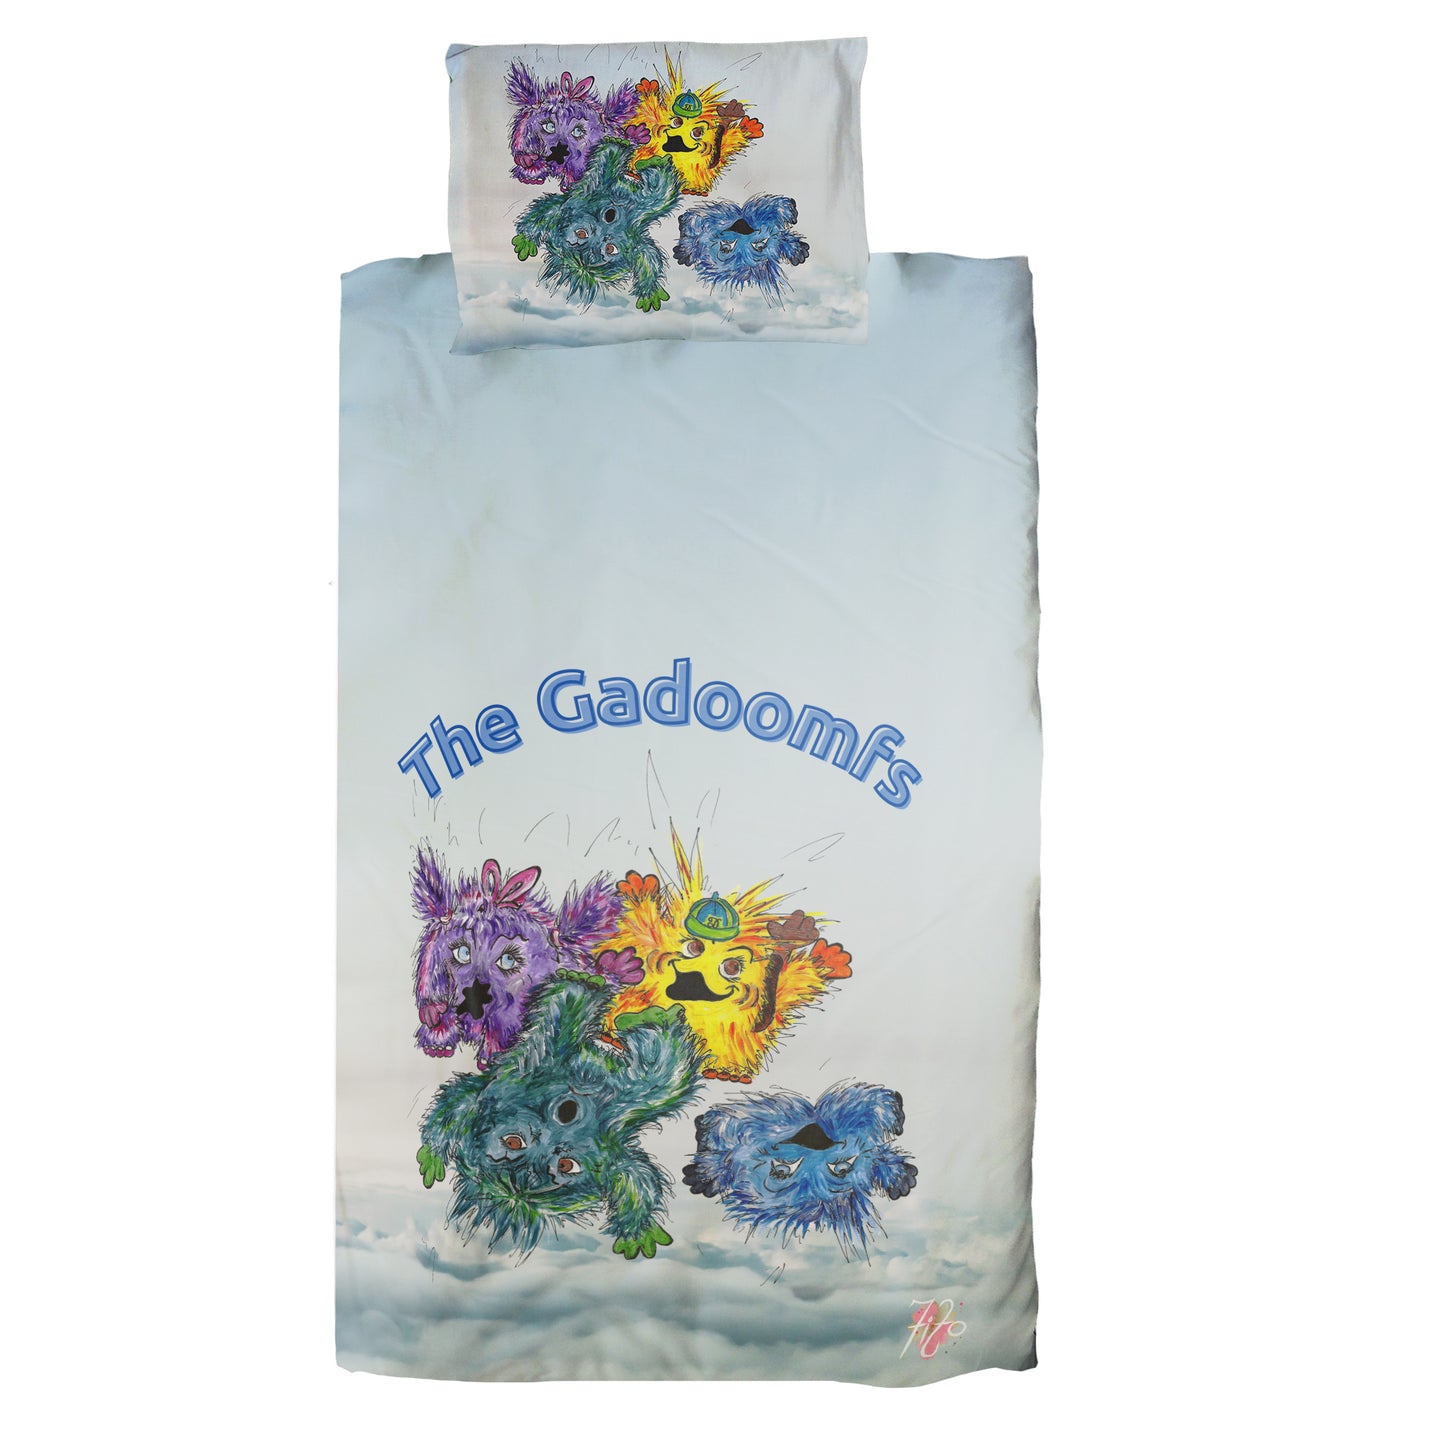 Gadoomfs Above the Clouds Cot Duvet Set By Fifo